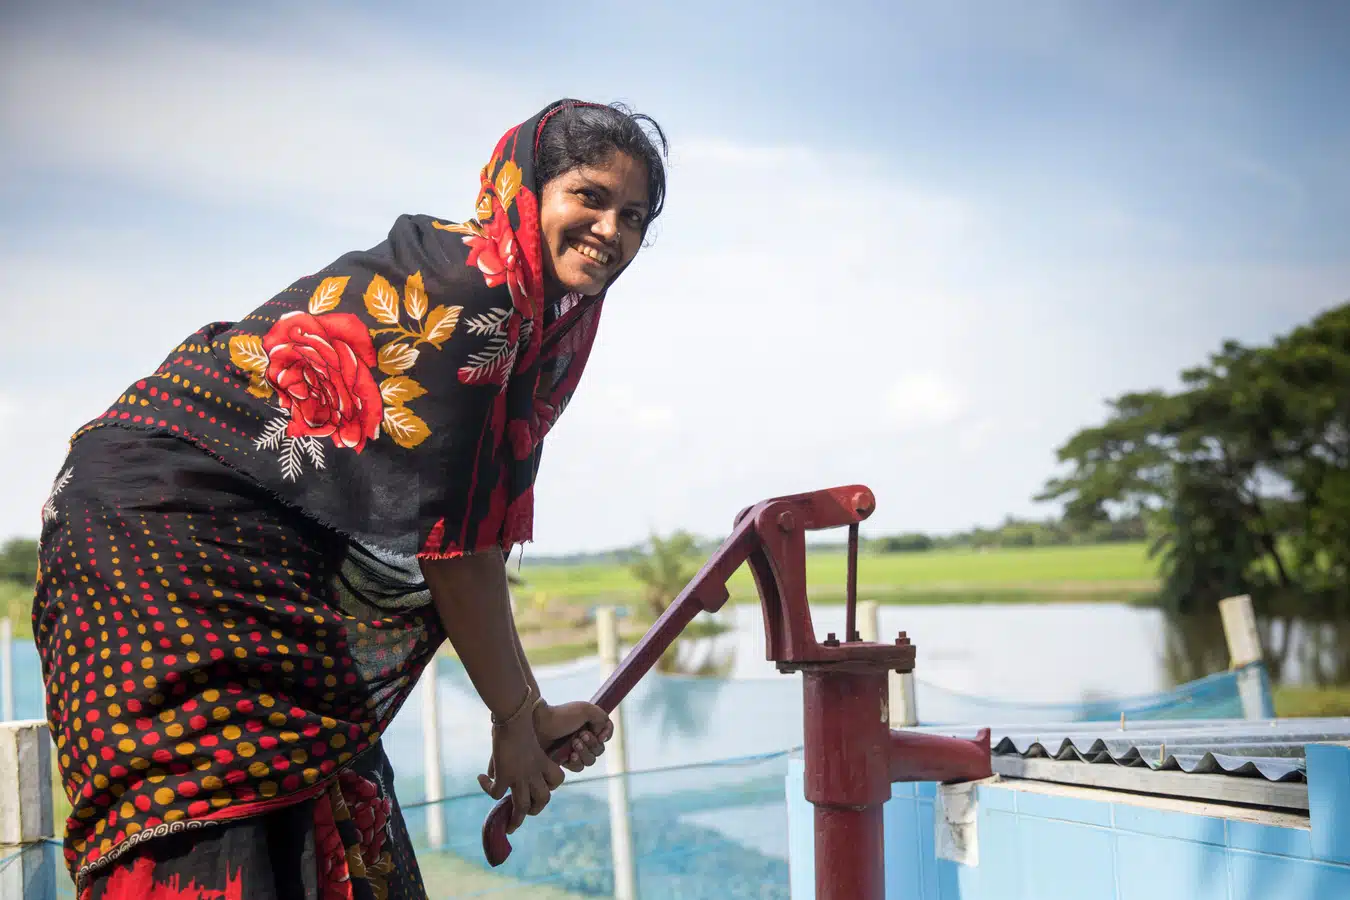 Julia is pumping treated water that is safe for drinking to bring to her family, Bangladesh.